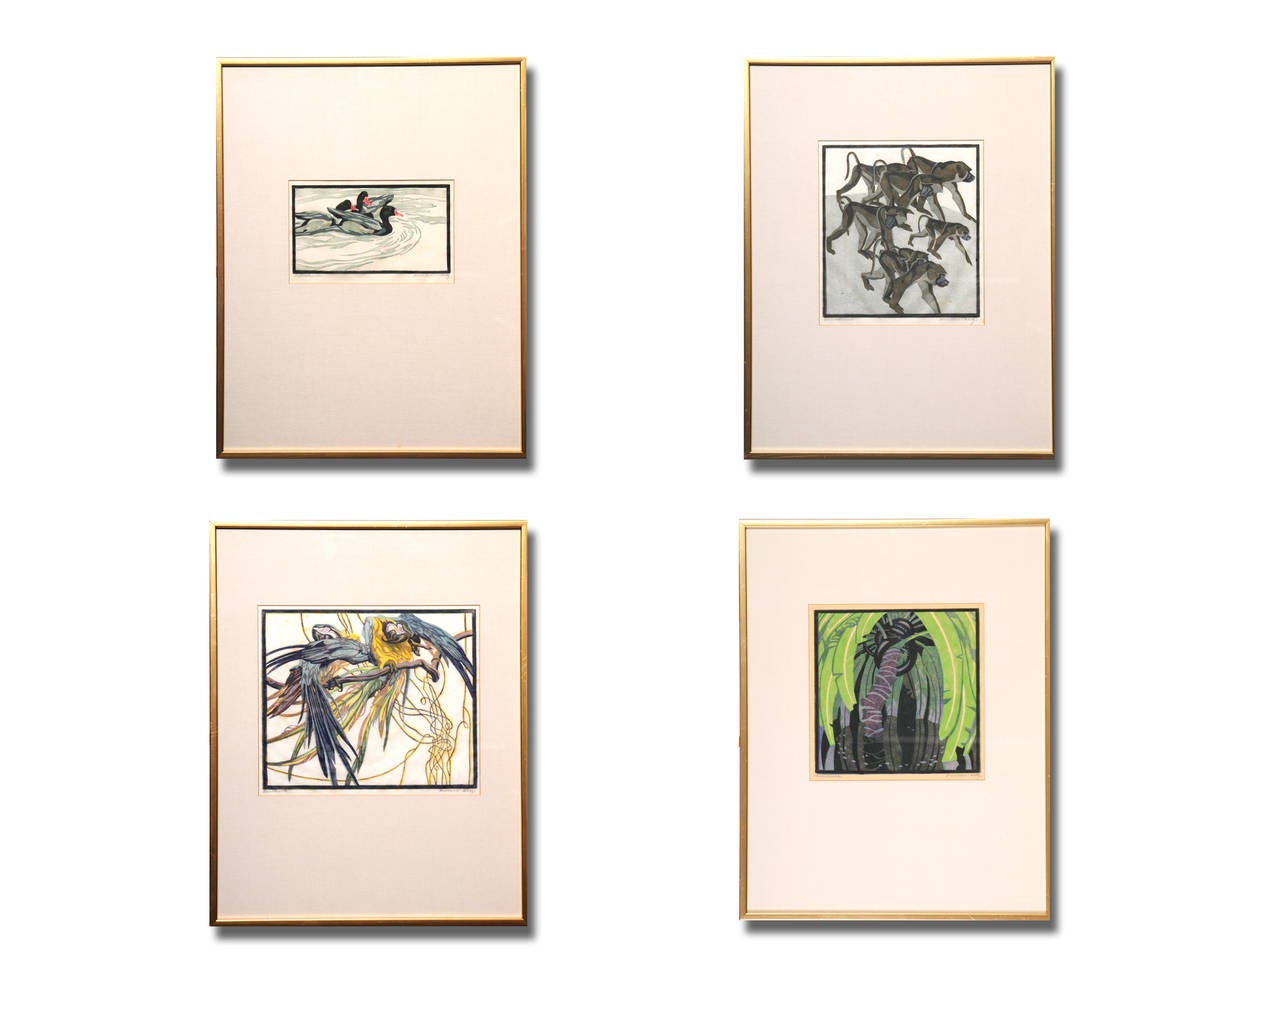 A set of four framed and glazed prints signed in pencil , depicting , ducks, parrots , elephant and monkeys Austrian painter and graphic artist, born 13.11.1891 in Graz, died 30.11.1978 in Graz

1901-1911, studies at the Austrian Art School in